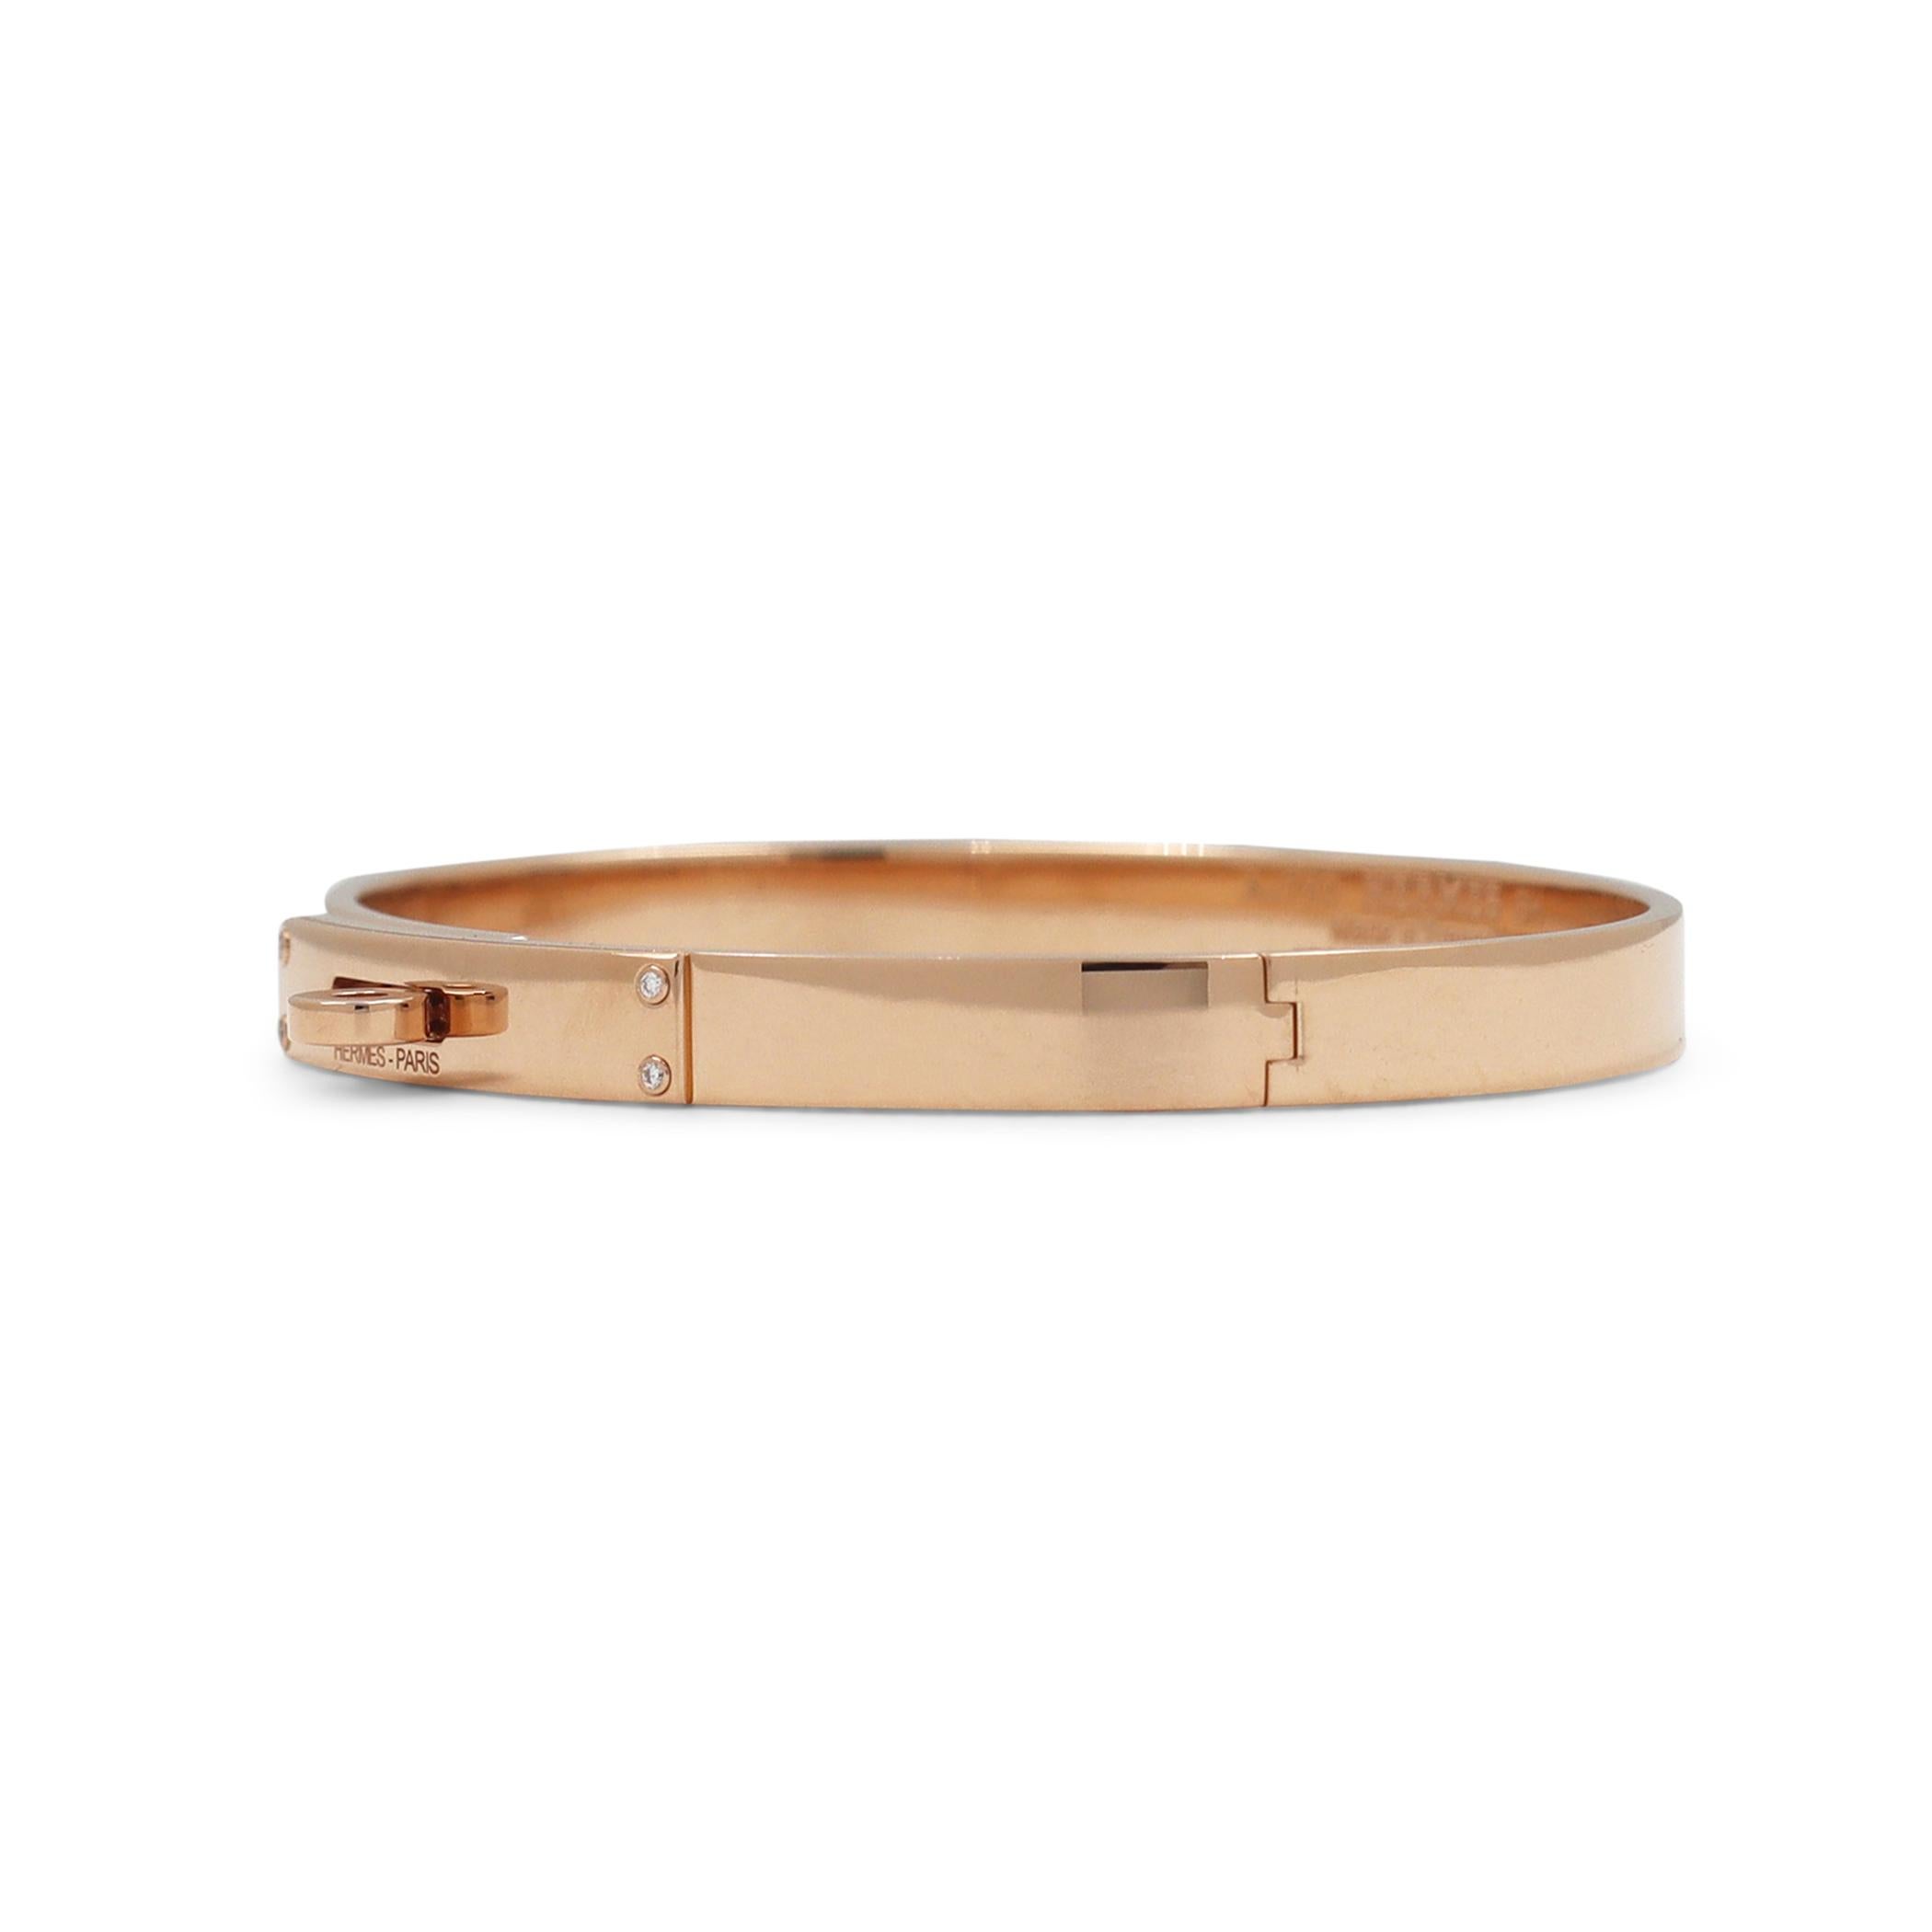 Authentic Hermès 'Kelly' bracelet crafted in 18 karat rose gold and accented with 4 round brilliant cut diamonds weighing an estimated 0.02 carats total. Its fastener, a turn clasp, is synonymous with the brand. Signed Hermes Paris, Au750, Made in